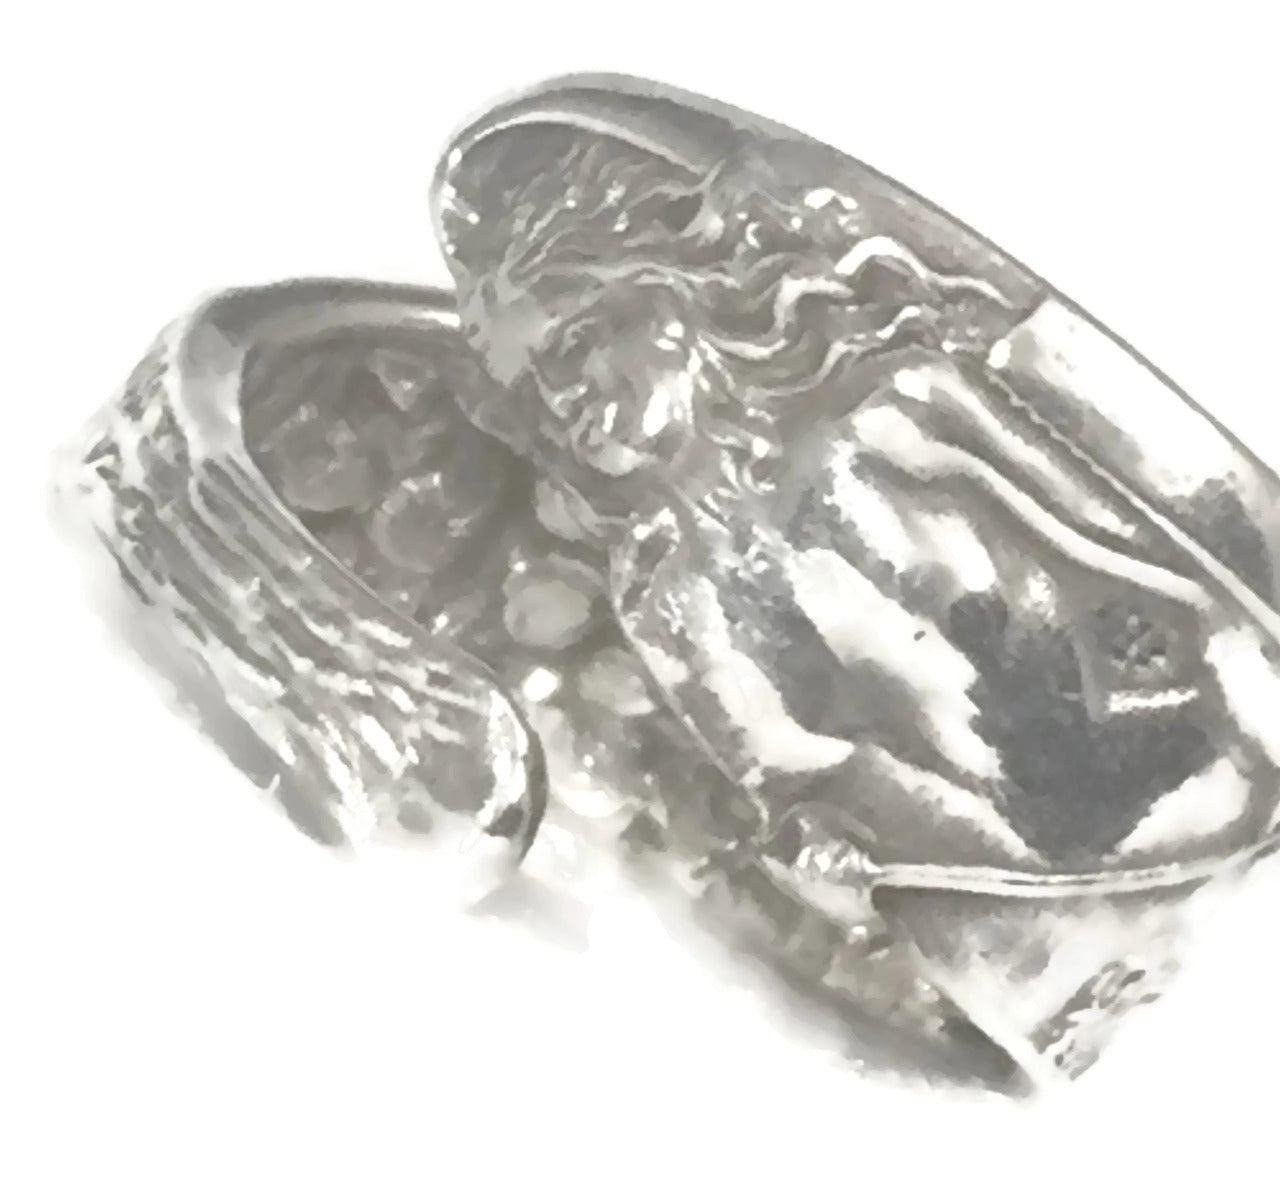 Spoon Naked Lady Ring Vintage Paddle Canoe Sterling Silver Size 7